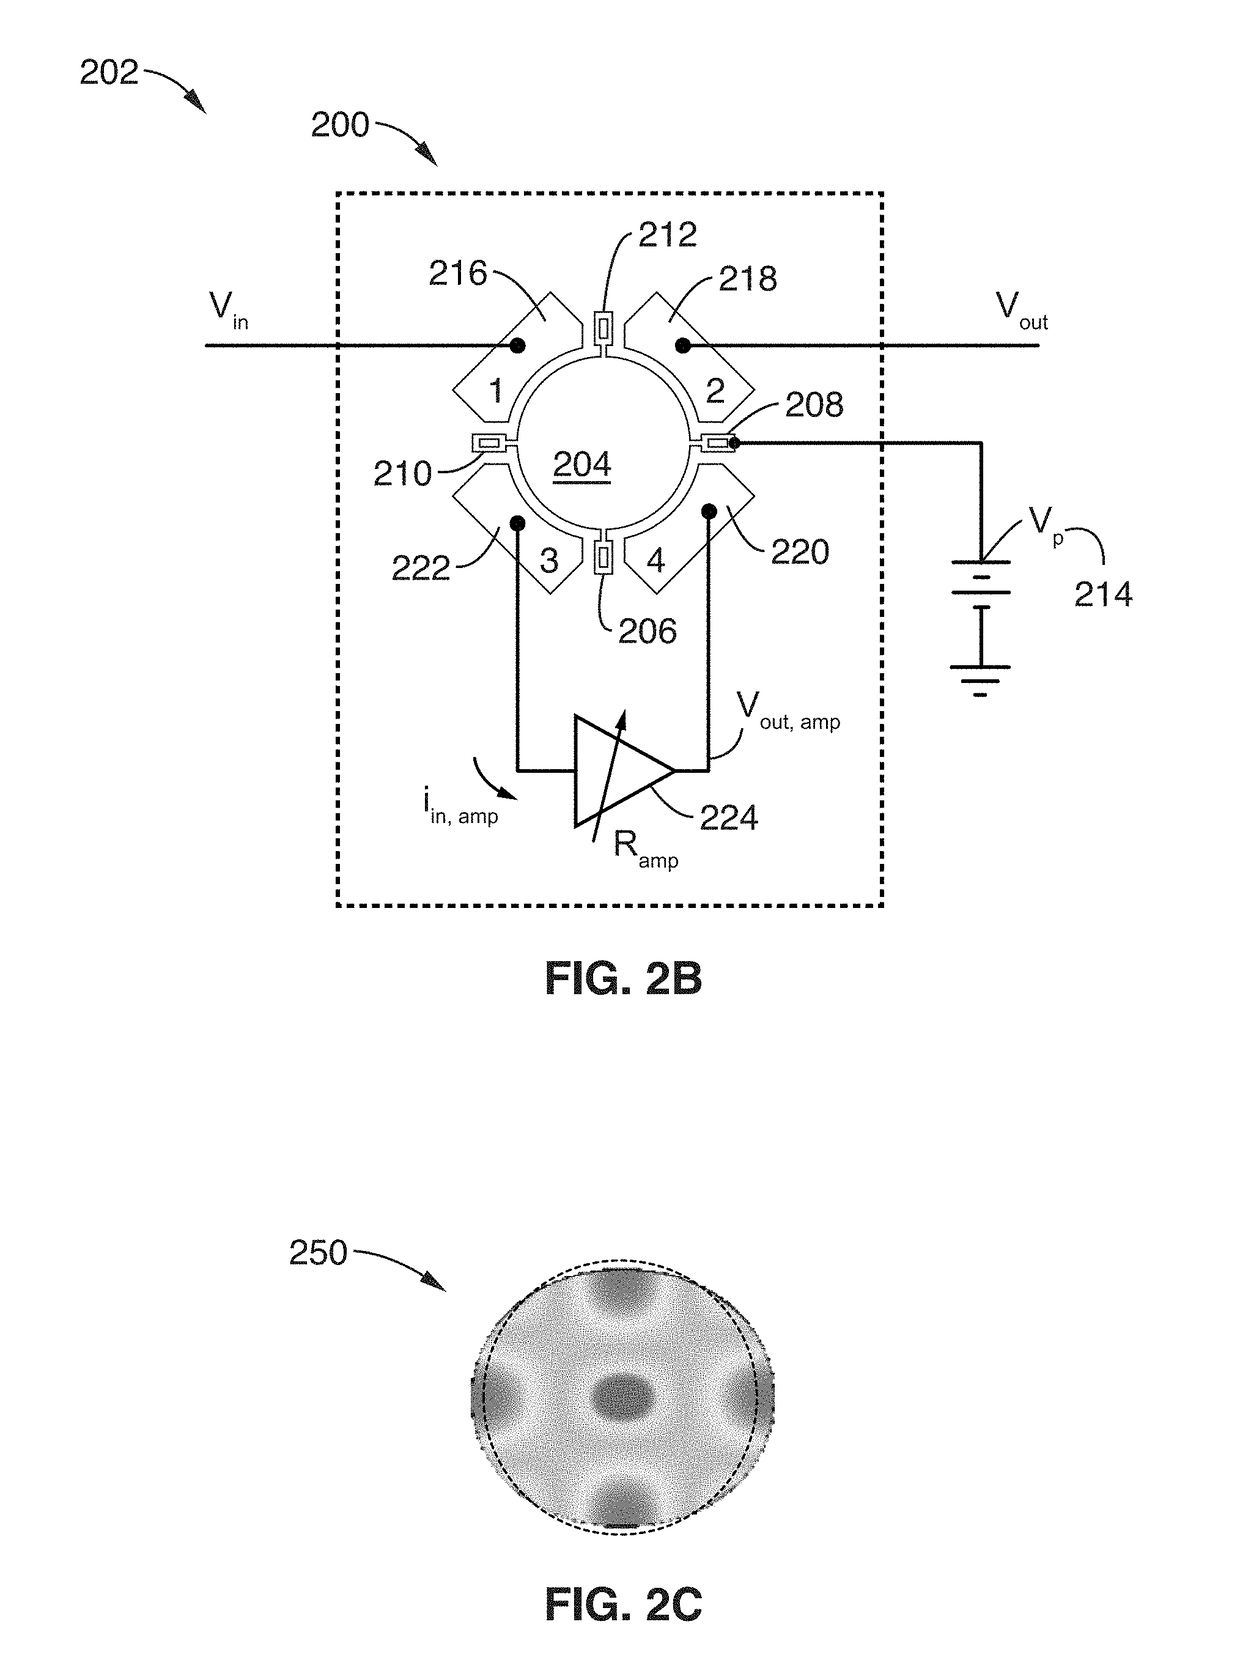 Active resonator system with tunable quality factor, frequency, and impedance